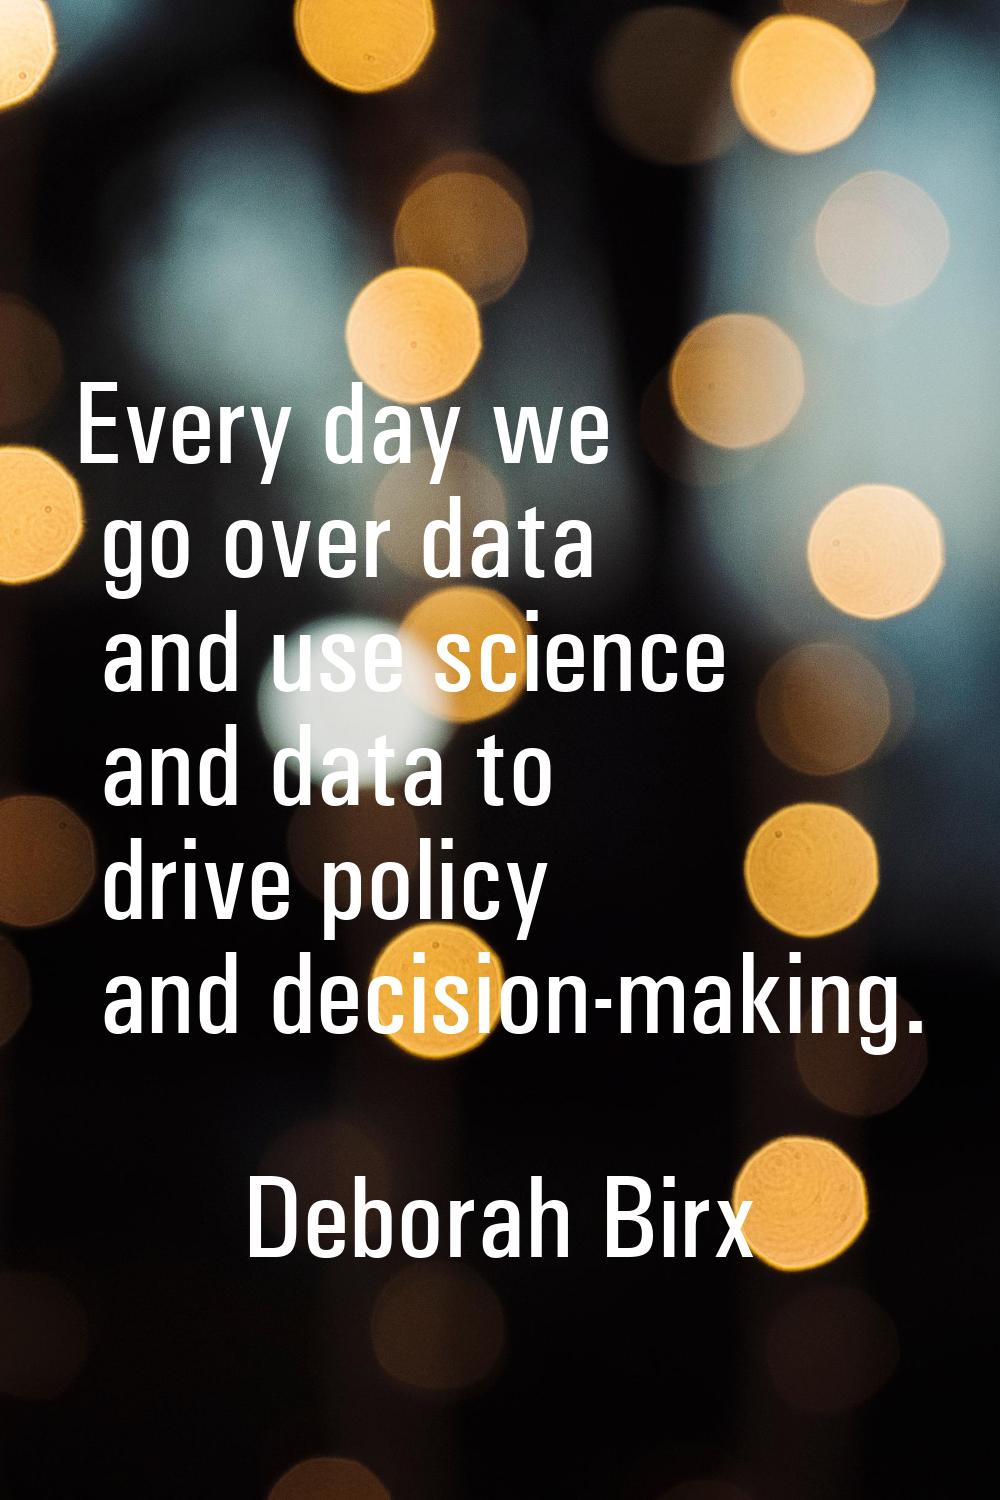 Every day we go over data and use science and data to drive policy and decision-making.